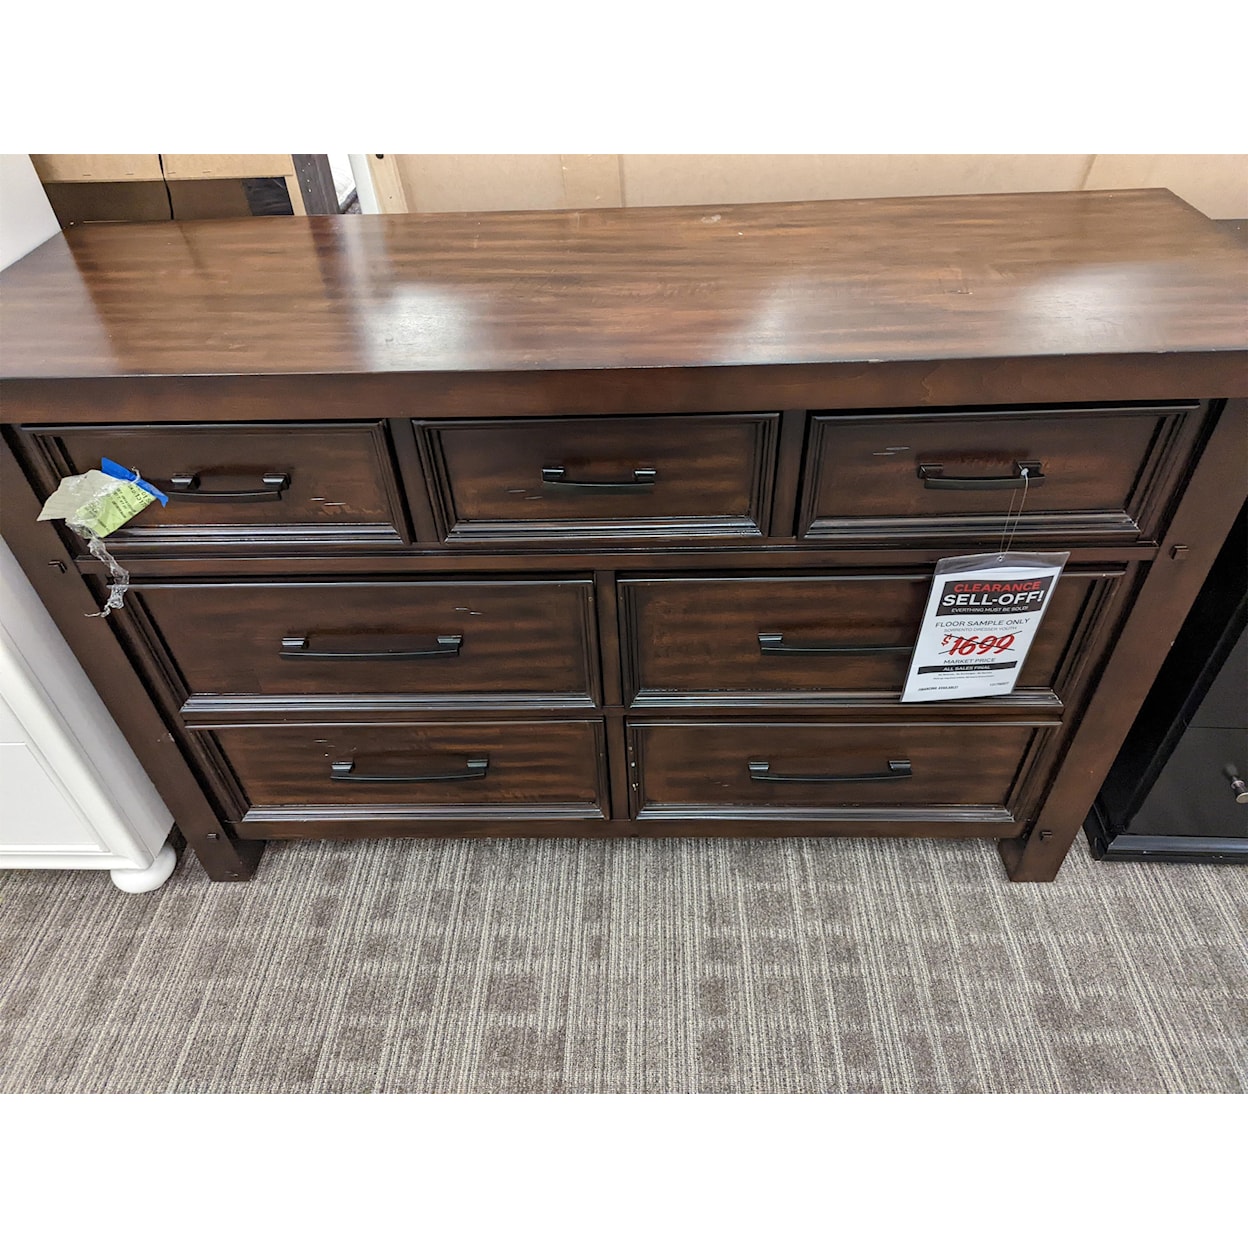 Morris Outlet Clearance and Closeouts Fairfield Commons Mall Last One! Youth Dresser!